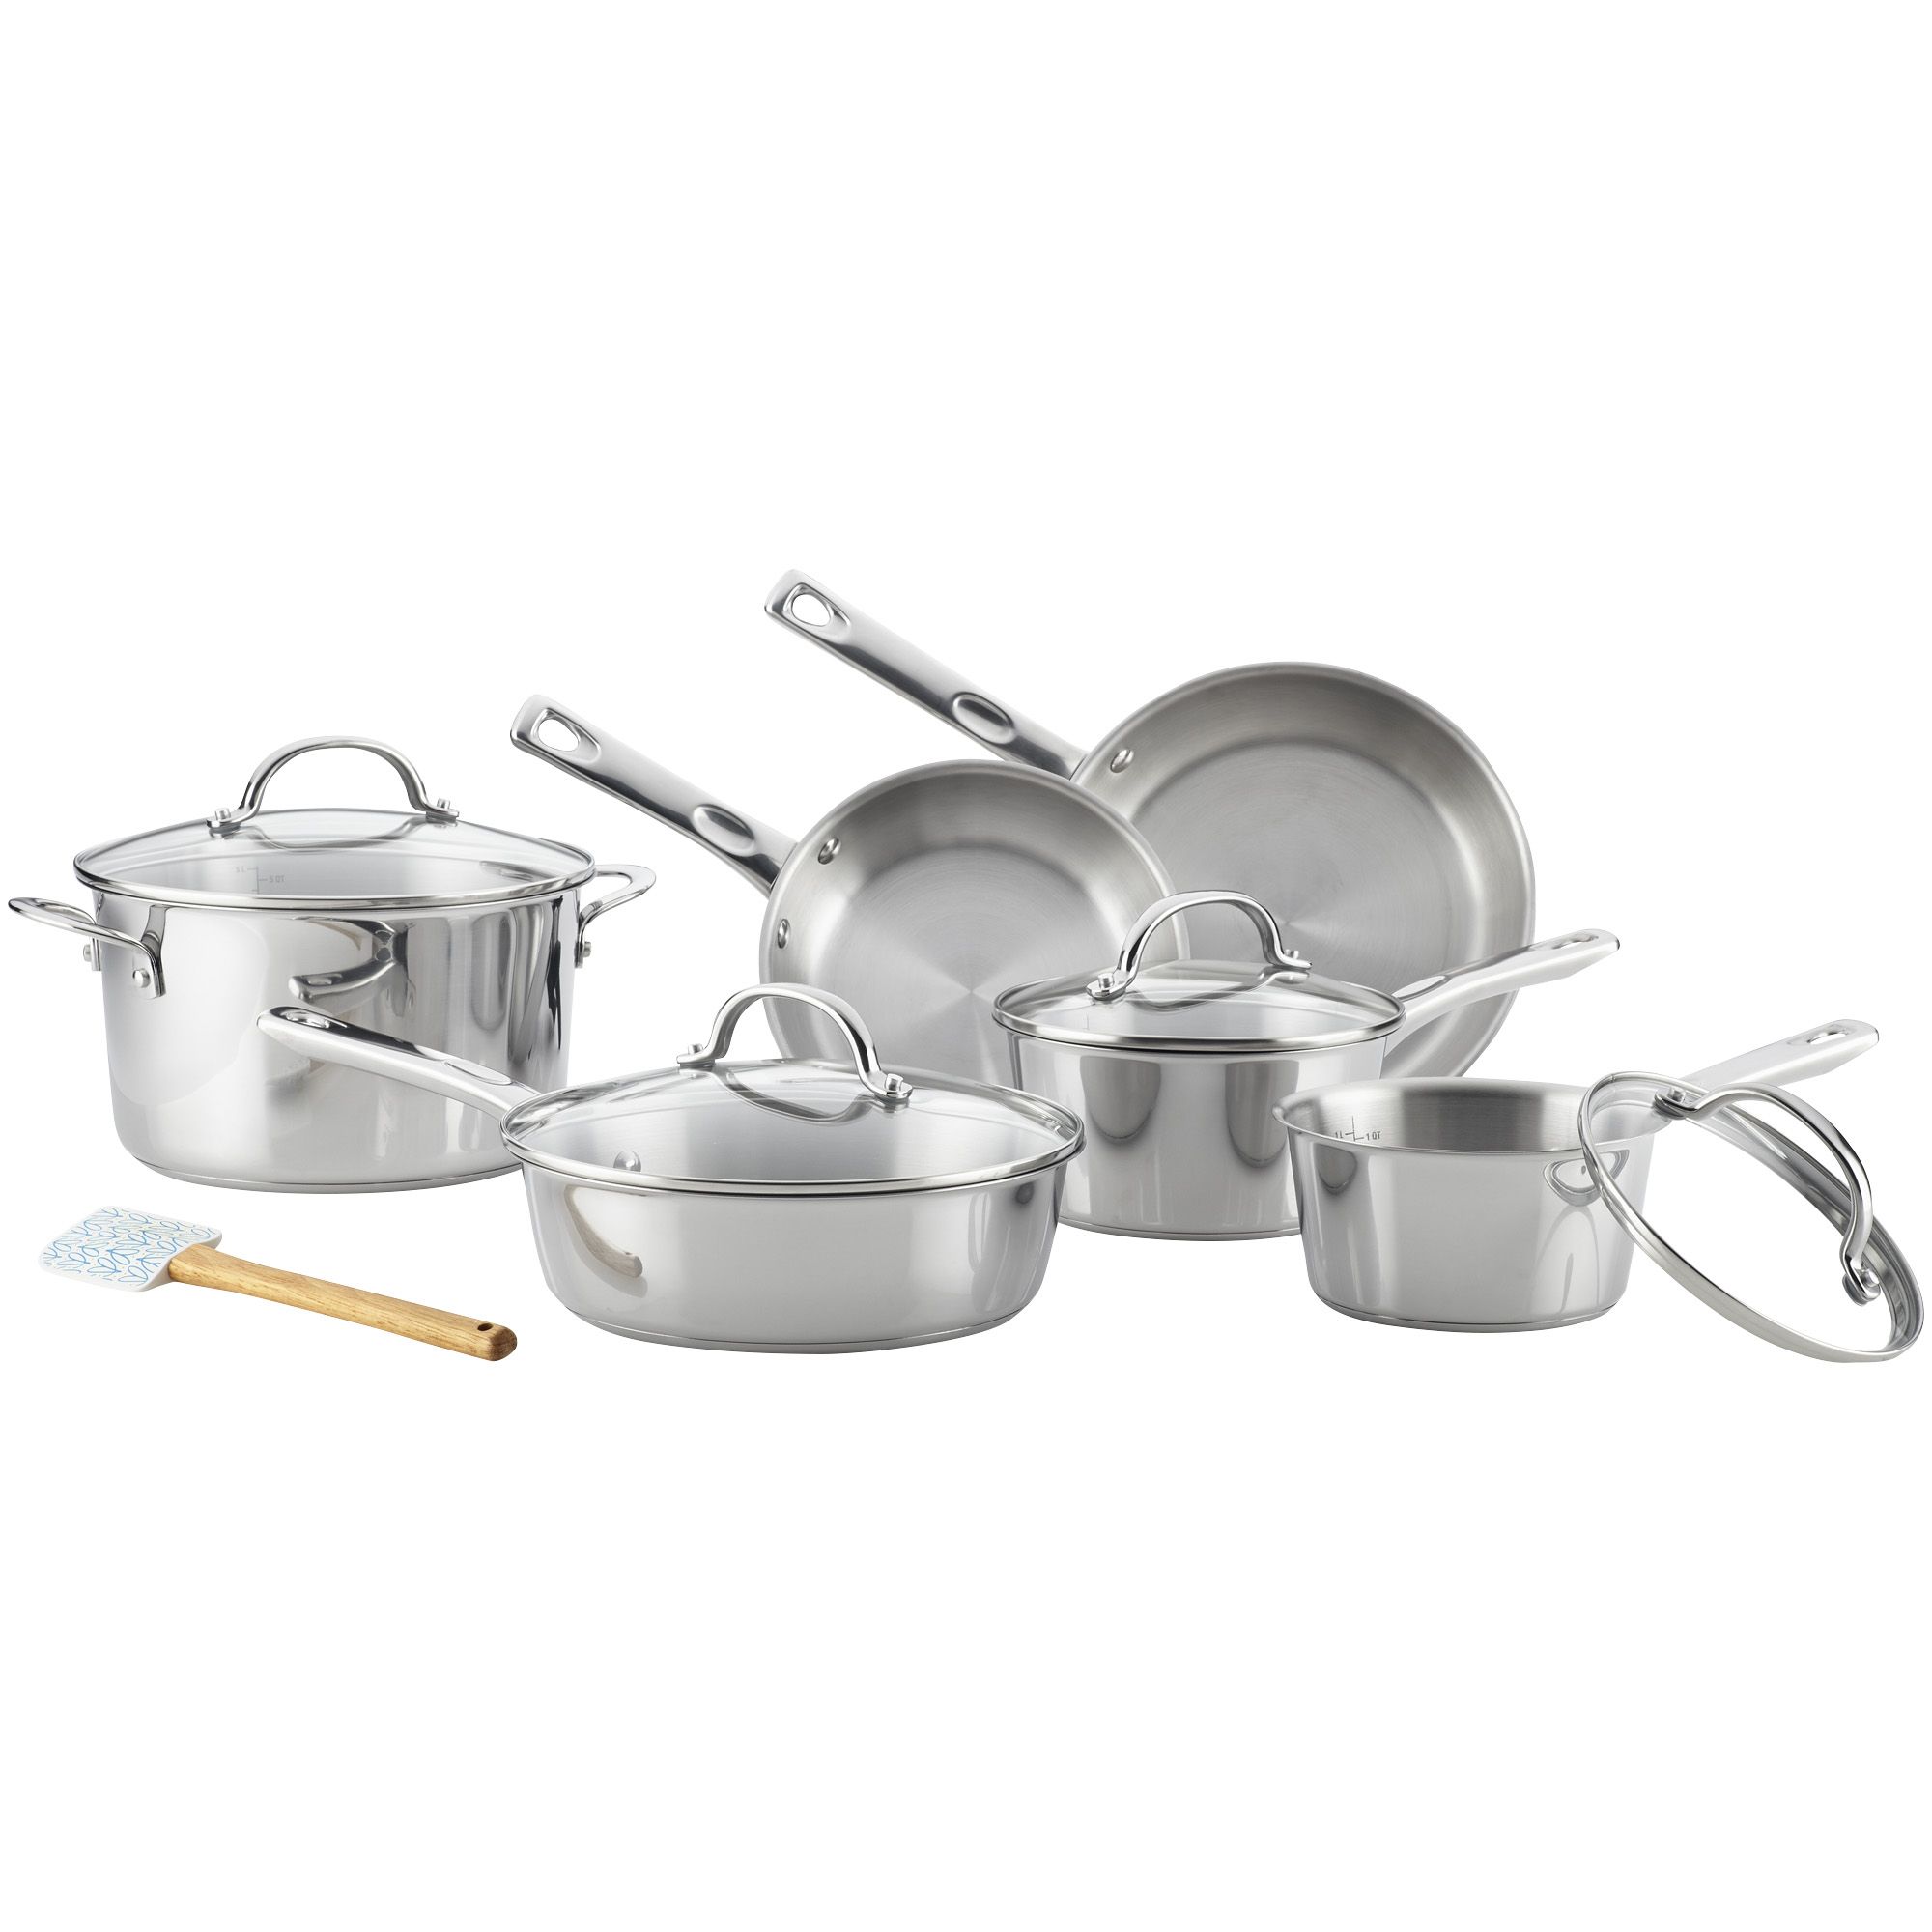 Ayesha Curry Home Collection Nonstick Cookware Pots and Pans Set, Includes  Cooking Utensils - 12 Piece & Reviews